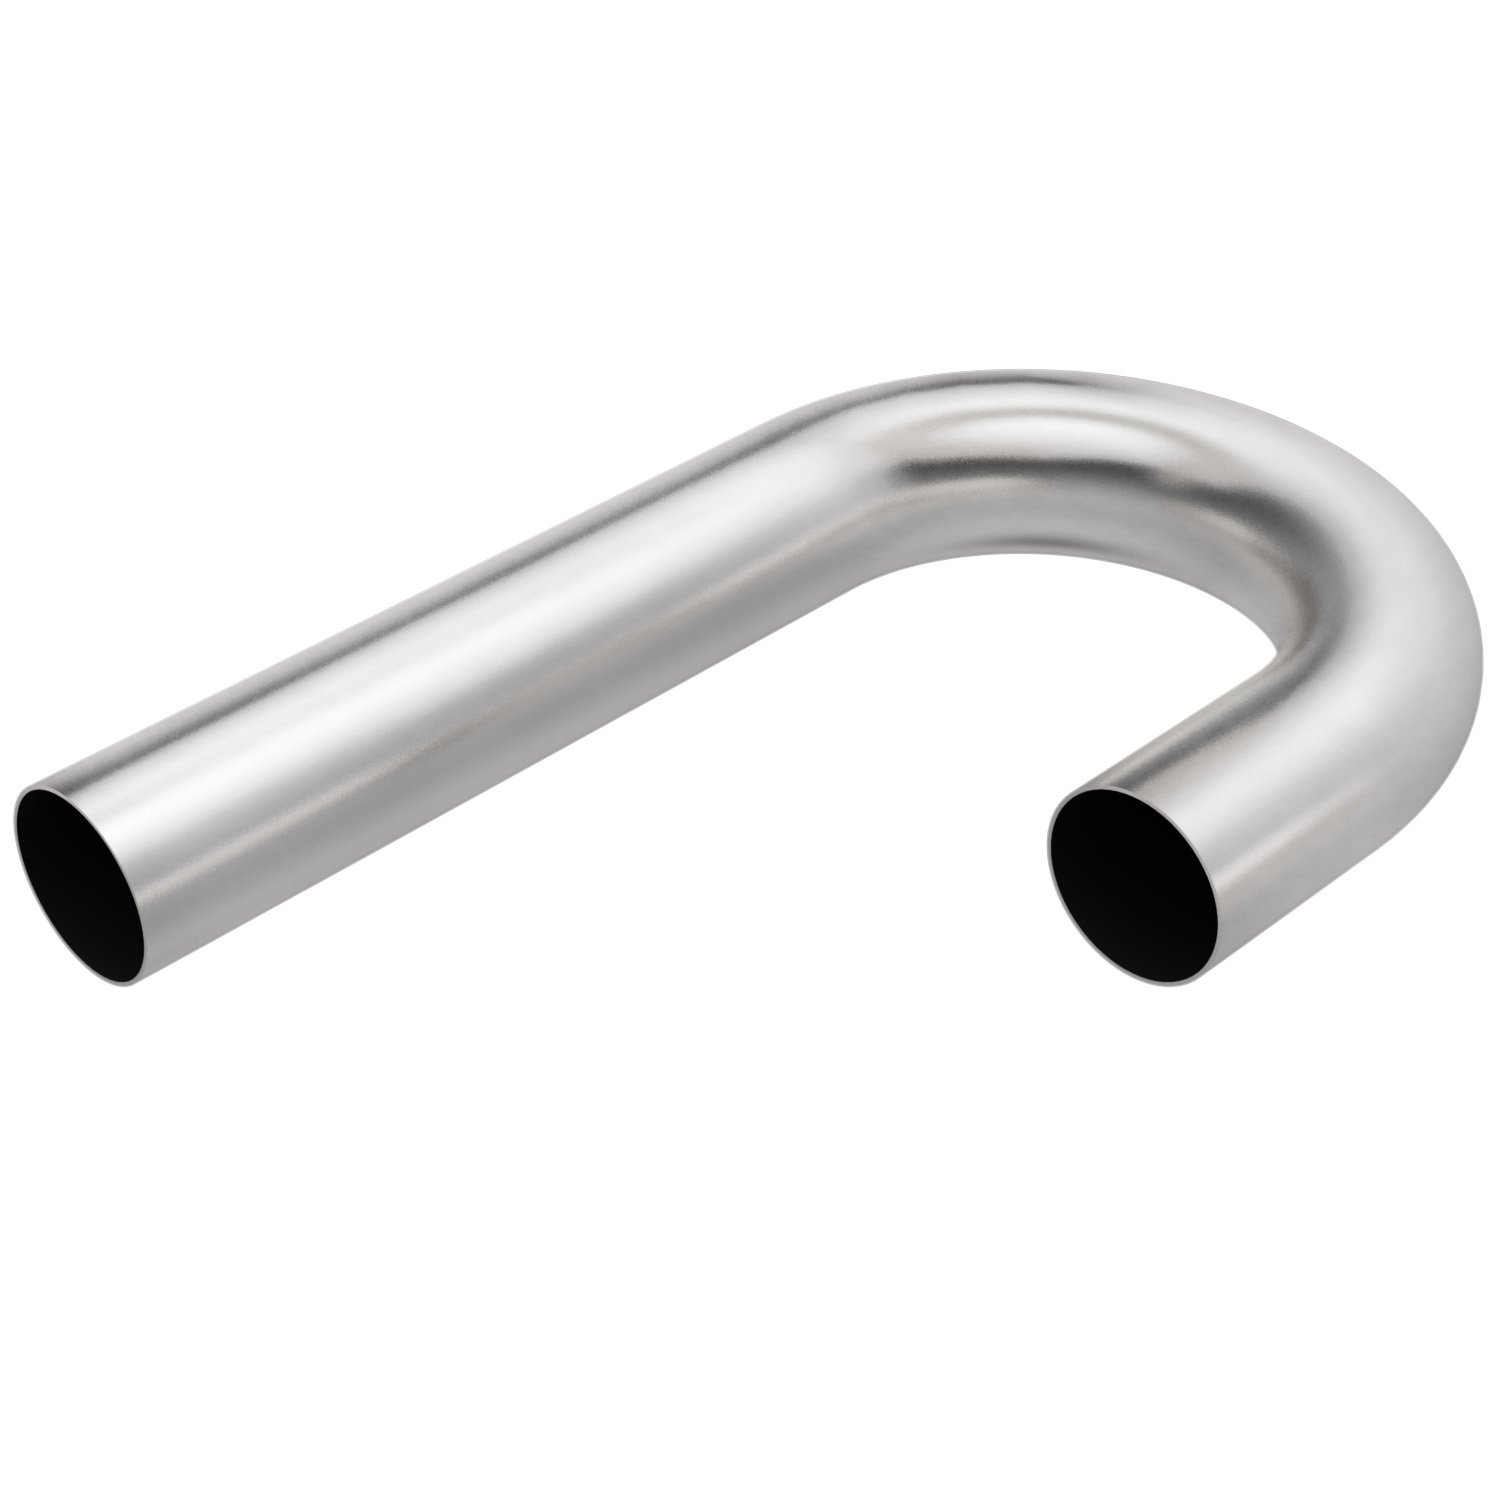 Stainless Steel 180° Transition Exhaust Pipe Outside Diameter: 3"